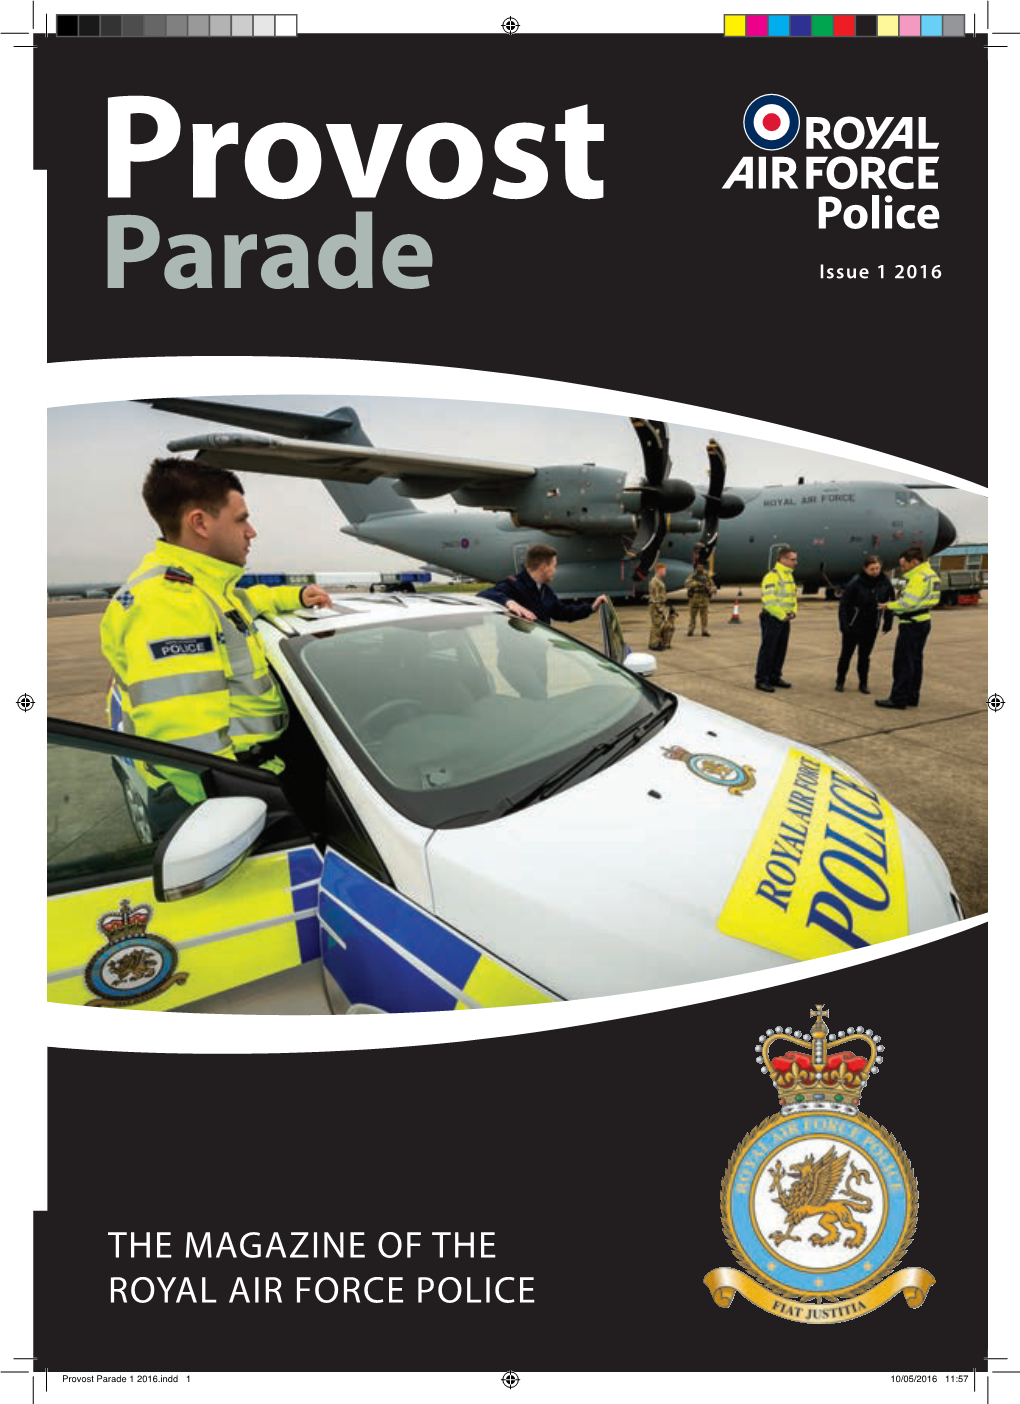 The Magazine of the Royal Air Force Police